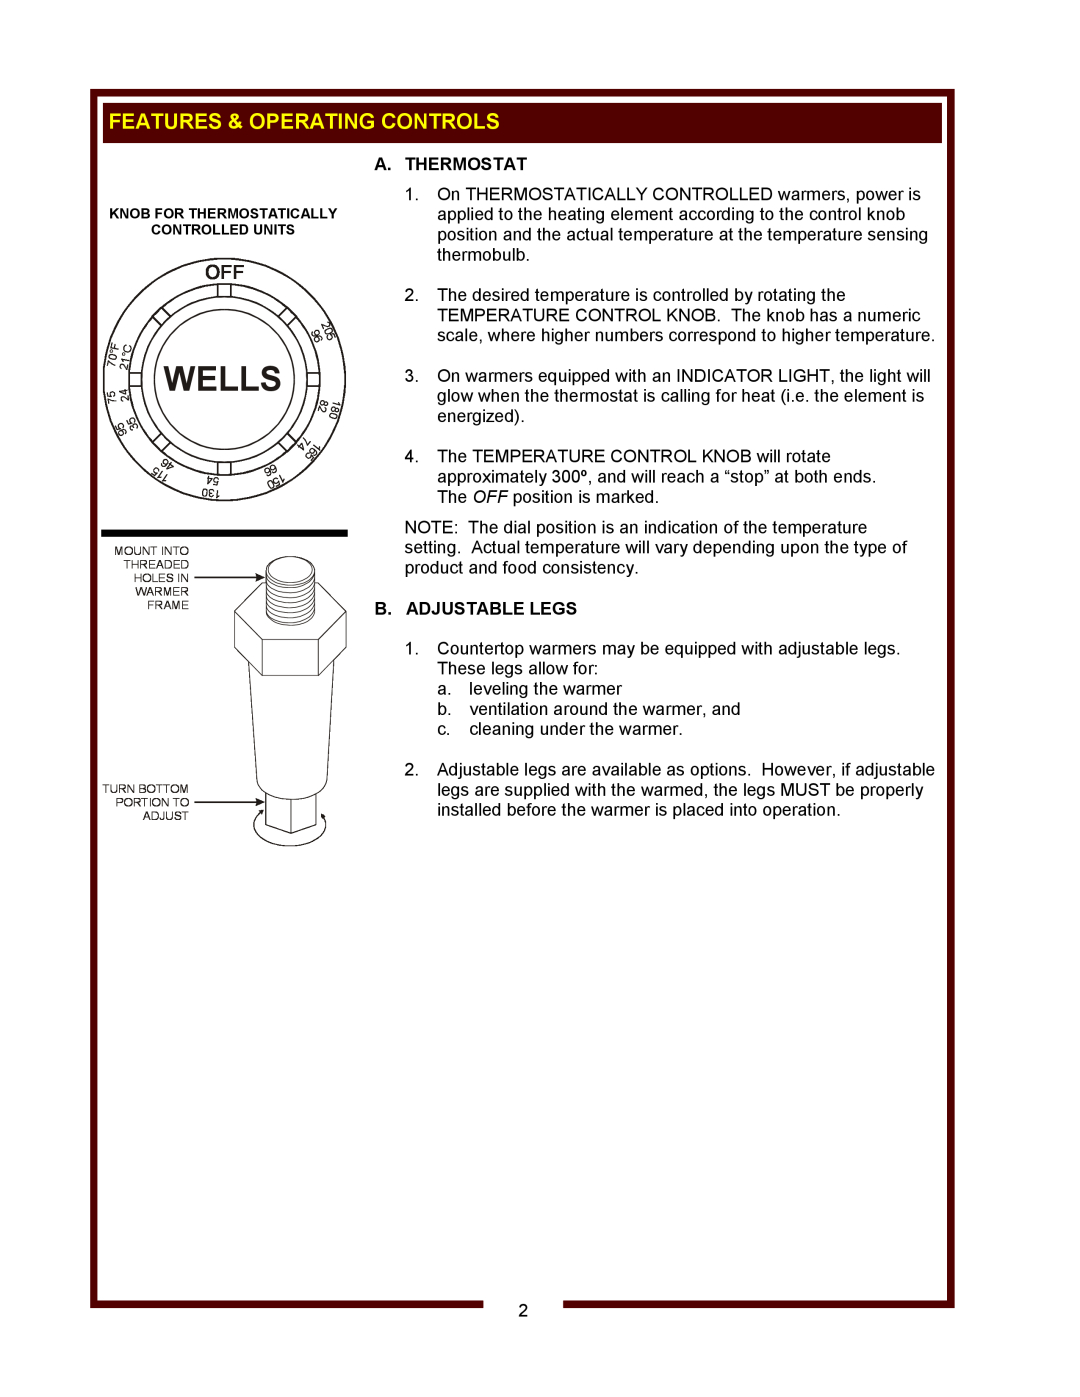 Wells HW-SMP, HW-10 operation manual Features & Operating Controls, Wells, A.Thermostat, B.Adjustable Legs 